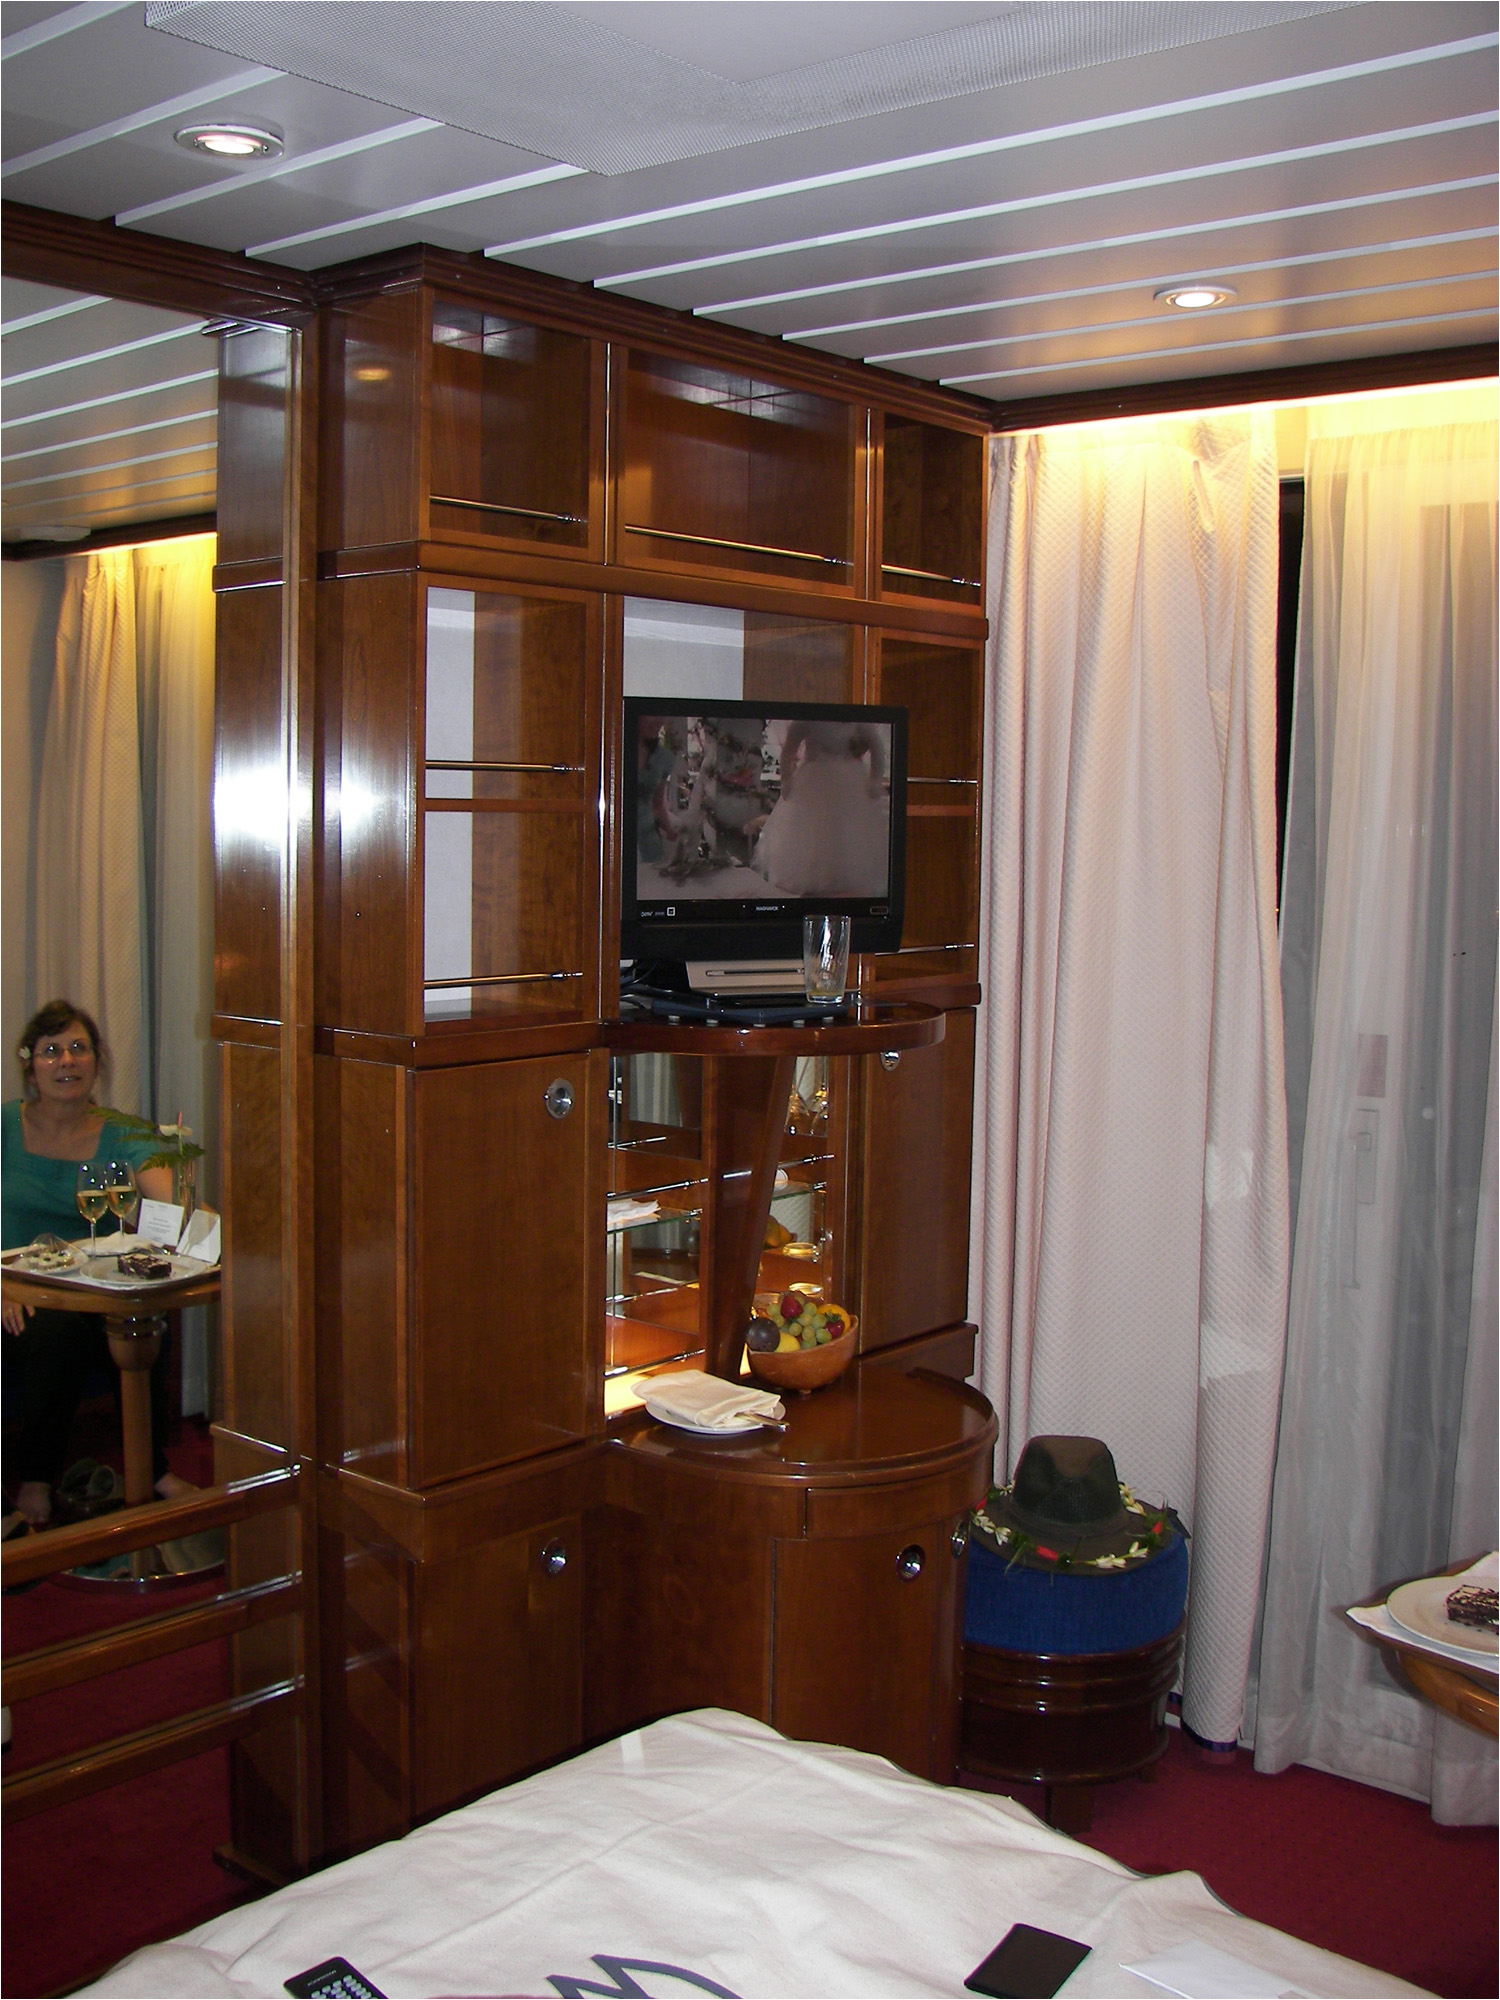 Stateroom looking towards the starboard side of the ship.  Stateroom came with small balcony on the other side of the curtains